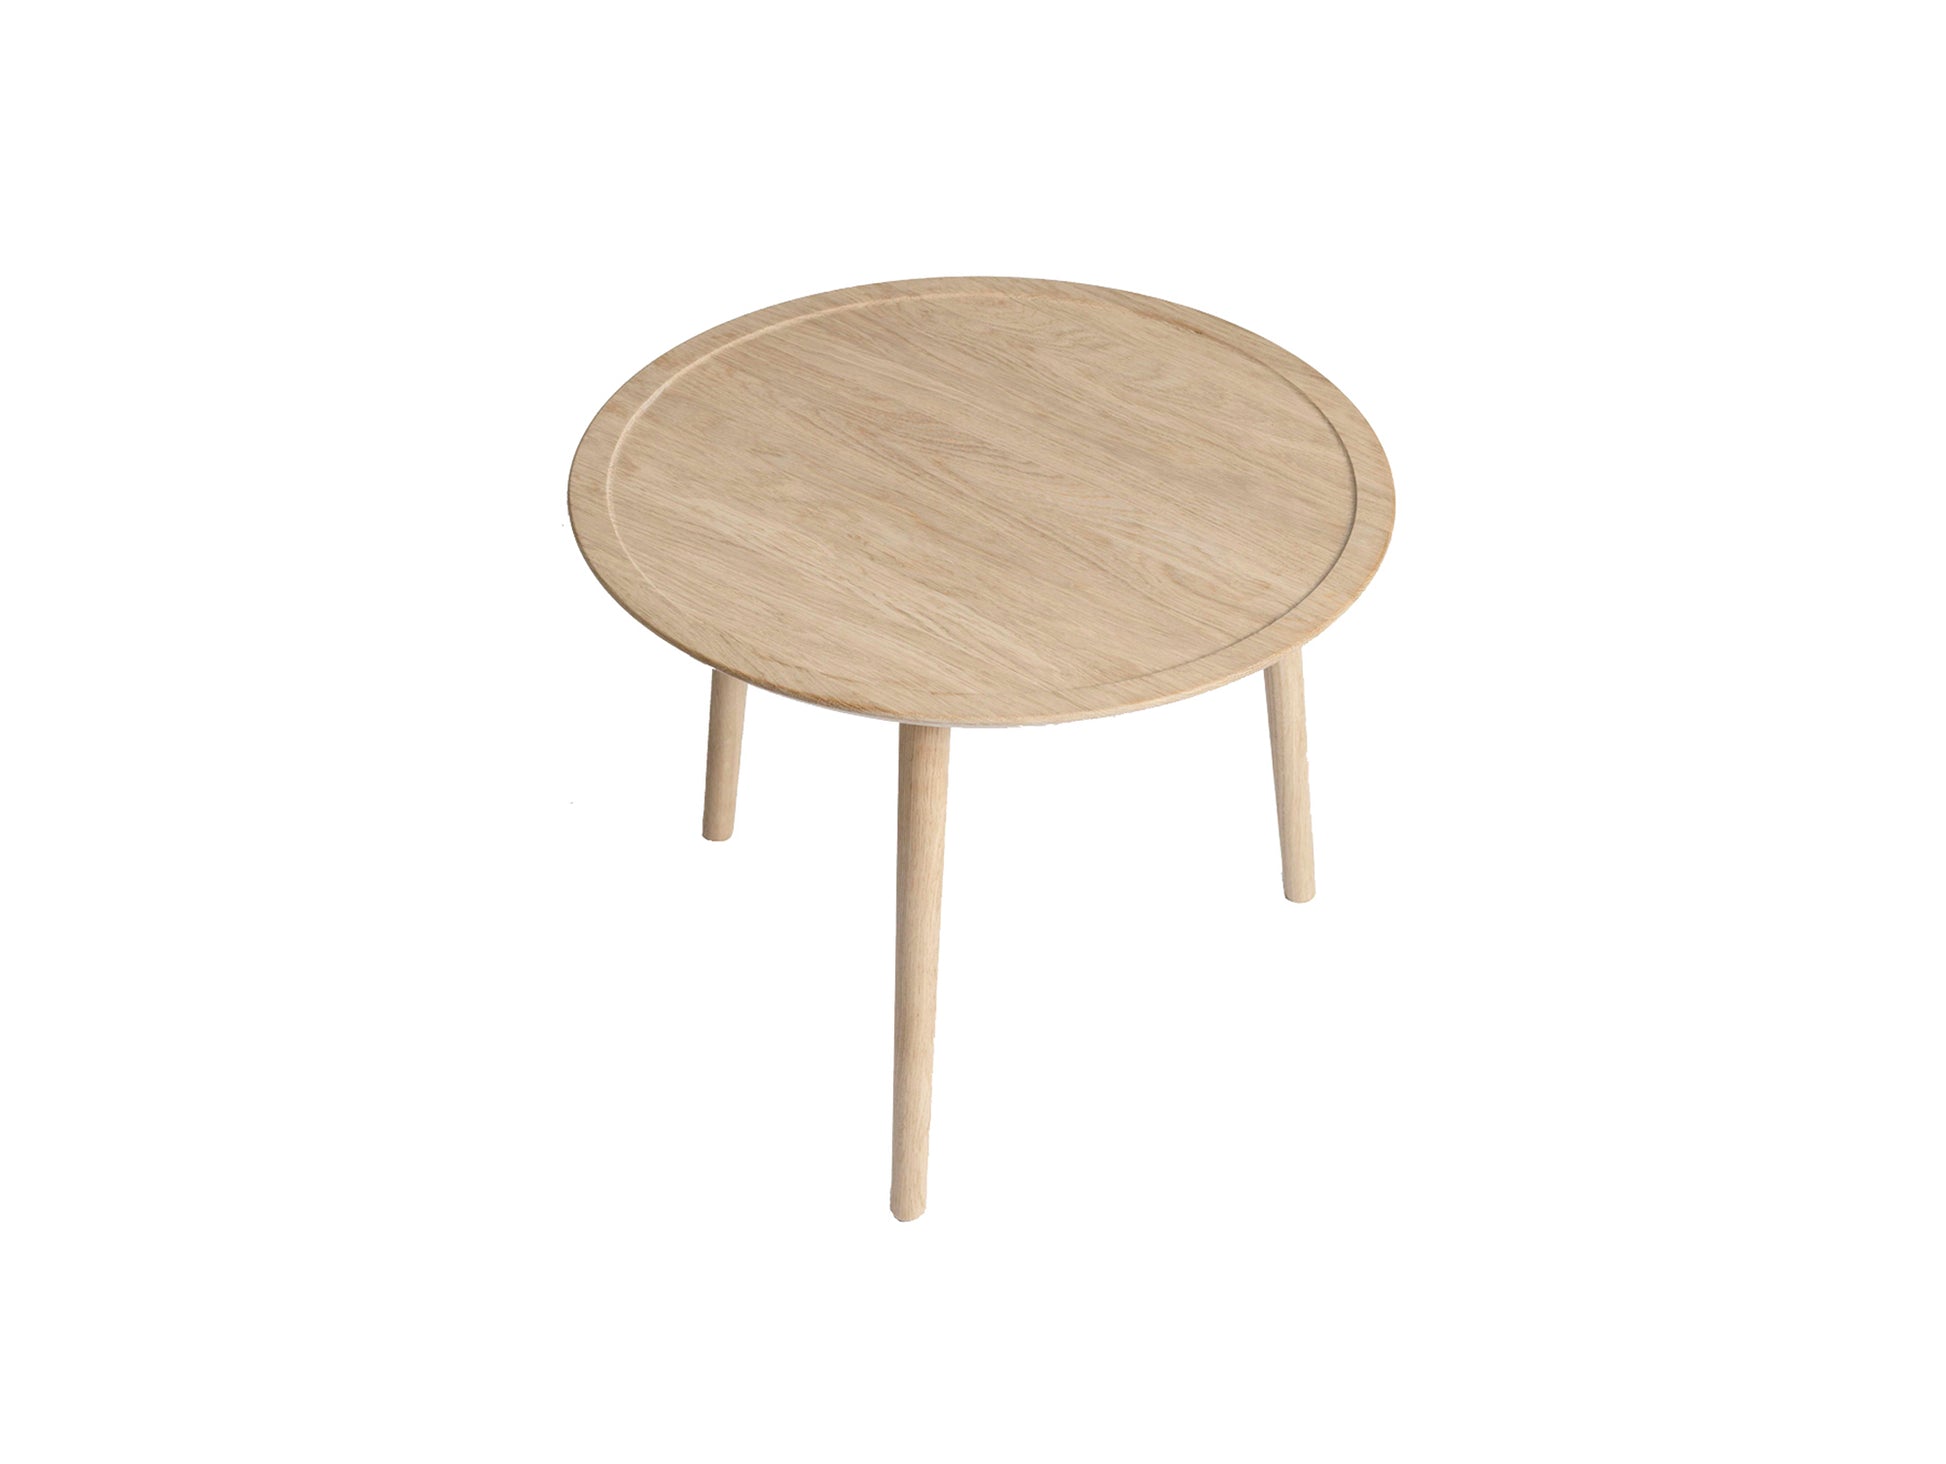 Dodona Coffee Table by Ro Collection - Diameter: 60 cm / Height: 46 cm / Soaped Oak